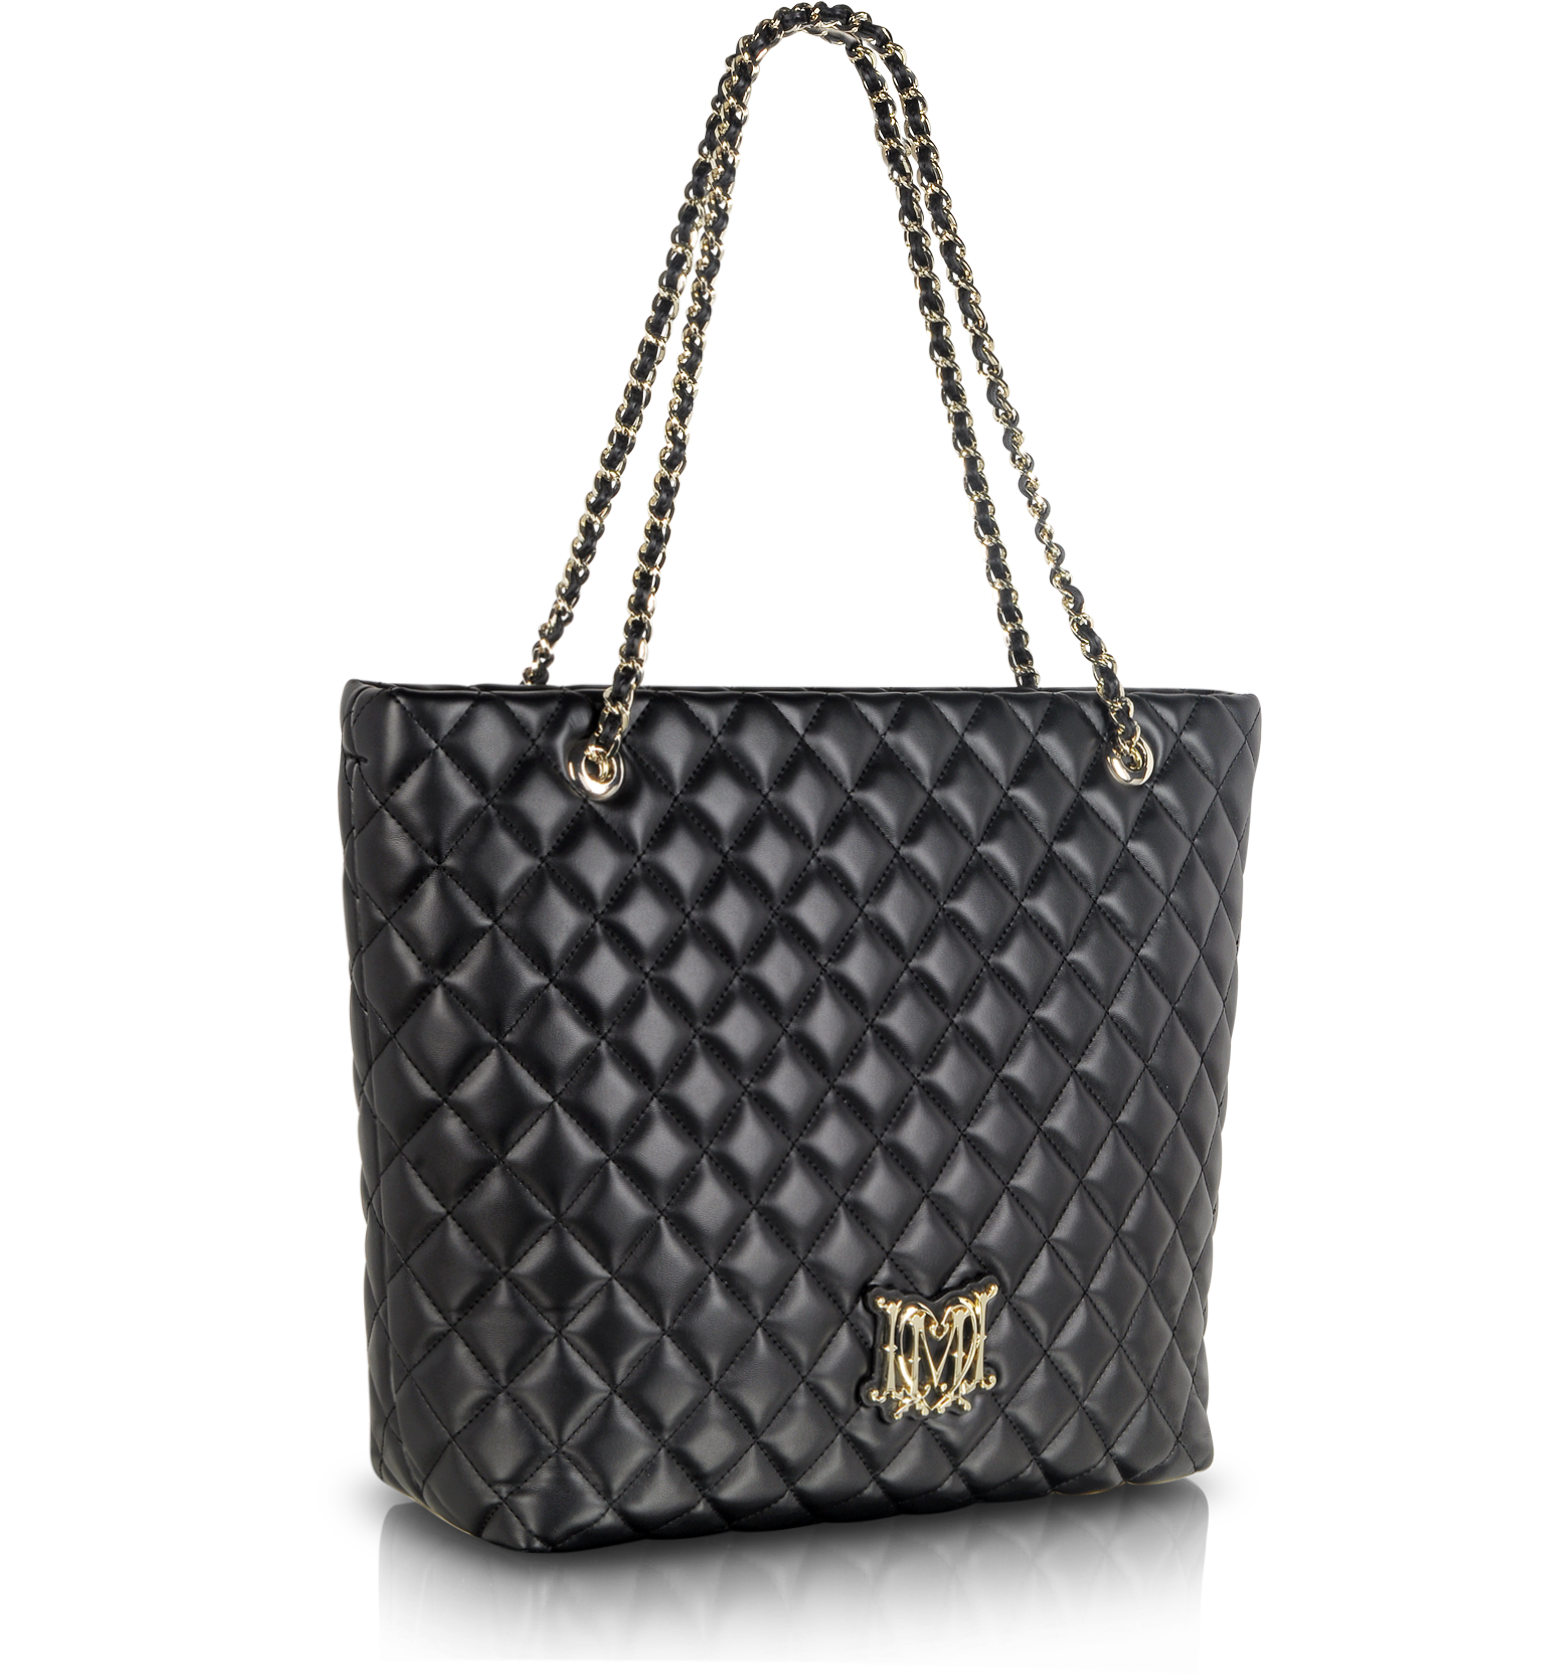 Moschino Black Quilted Eco Leather Tote at FORZIERI